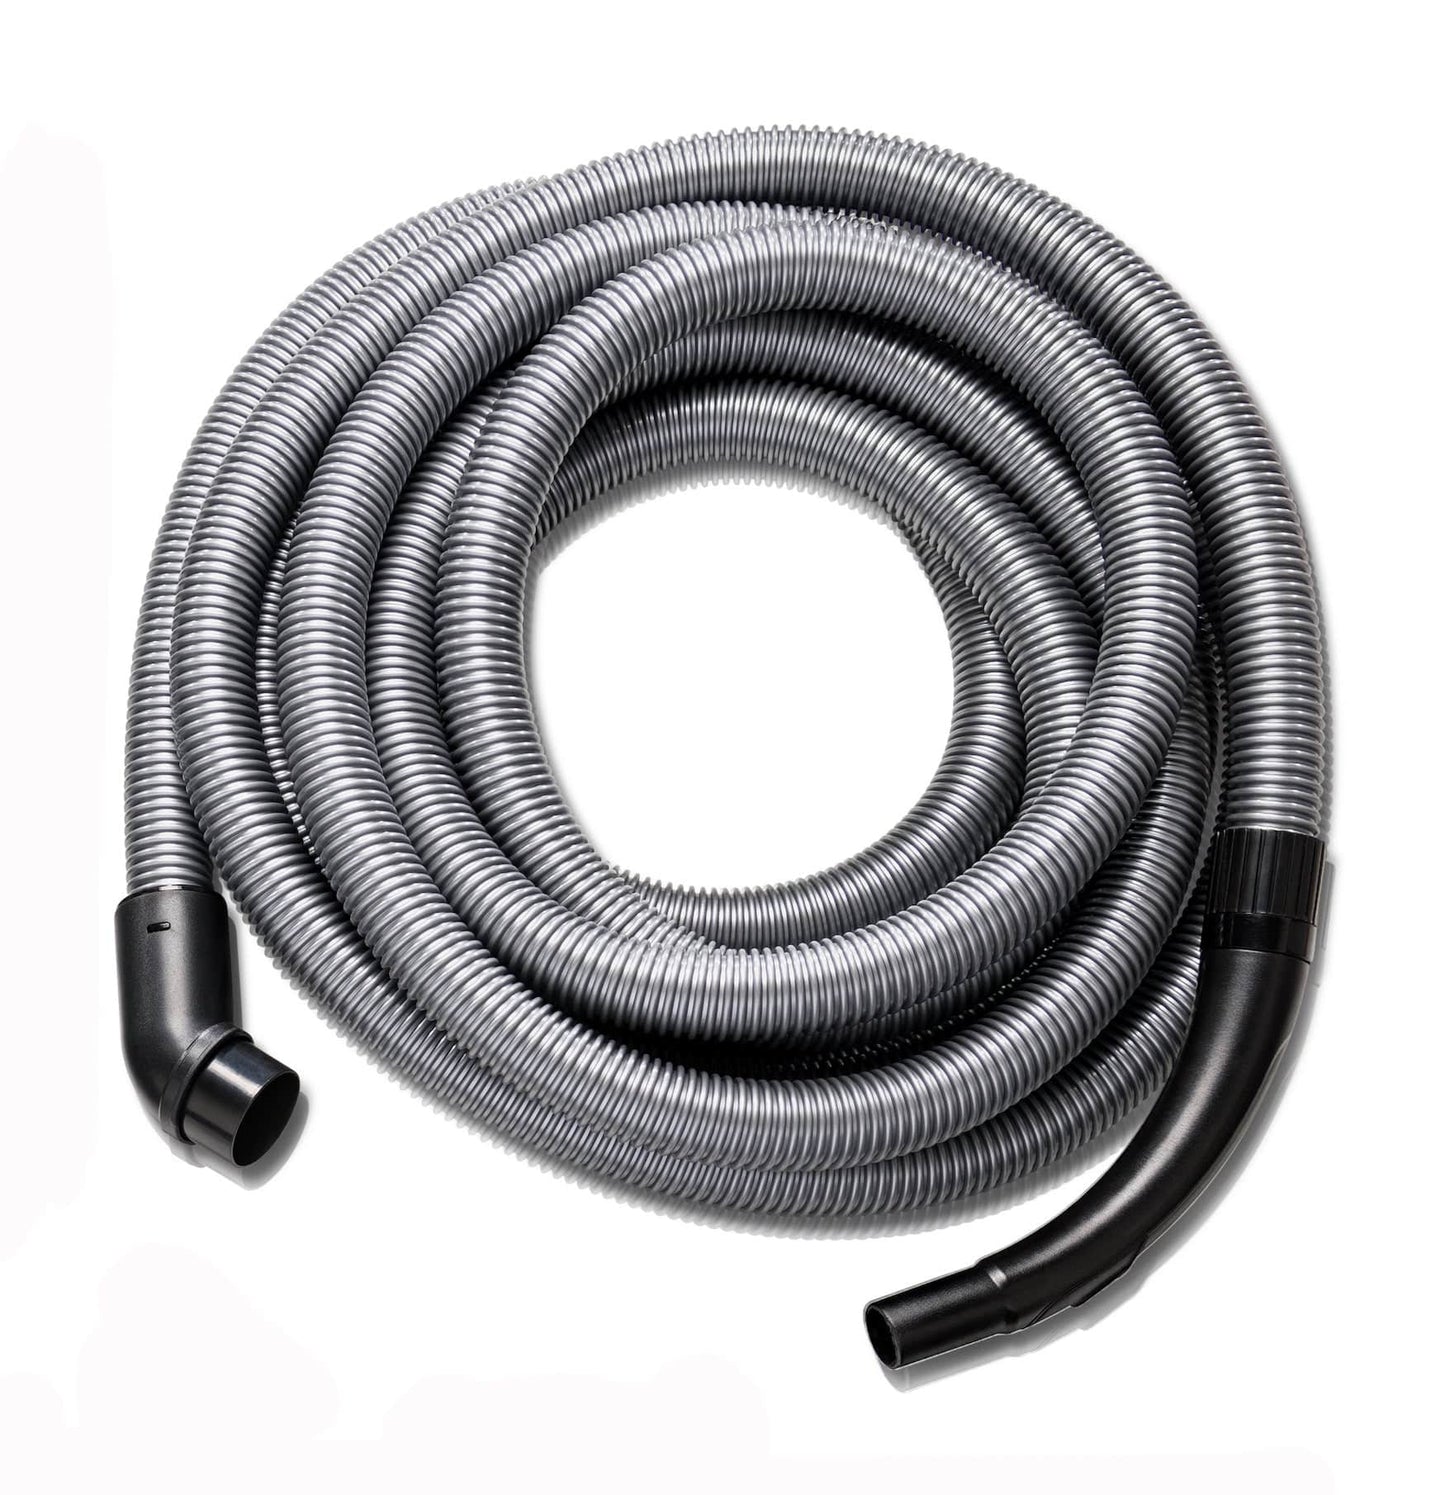 Prolux Wet/Dry Garage Vac Replacement Hose